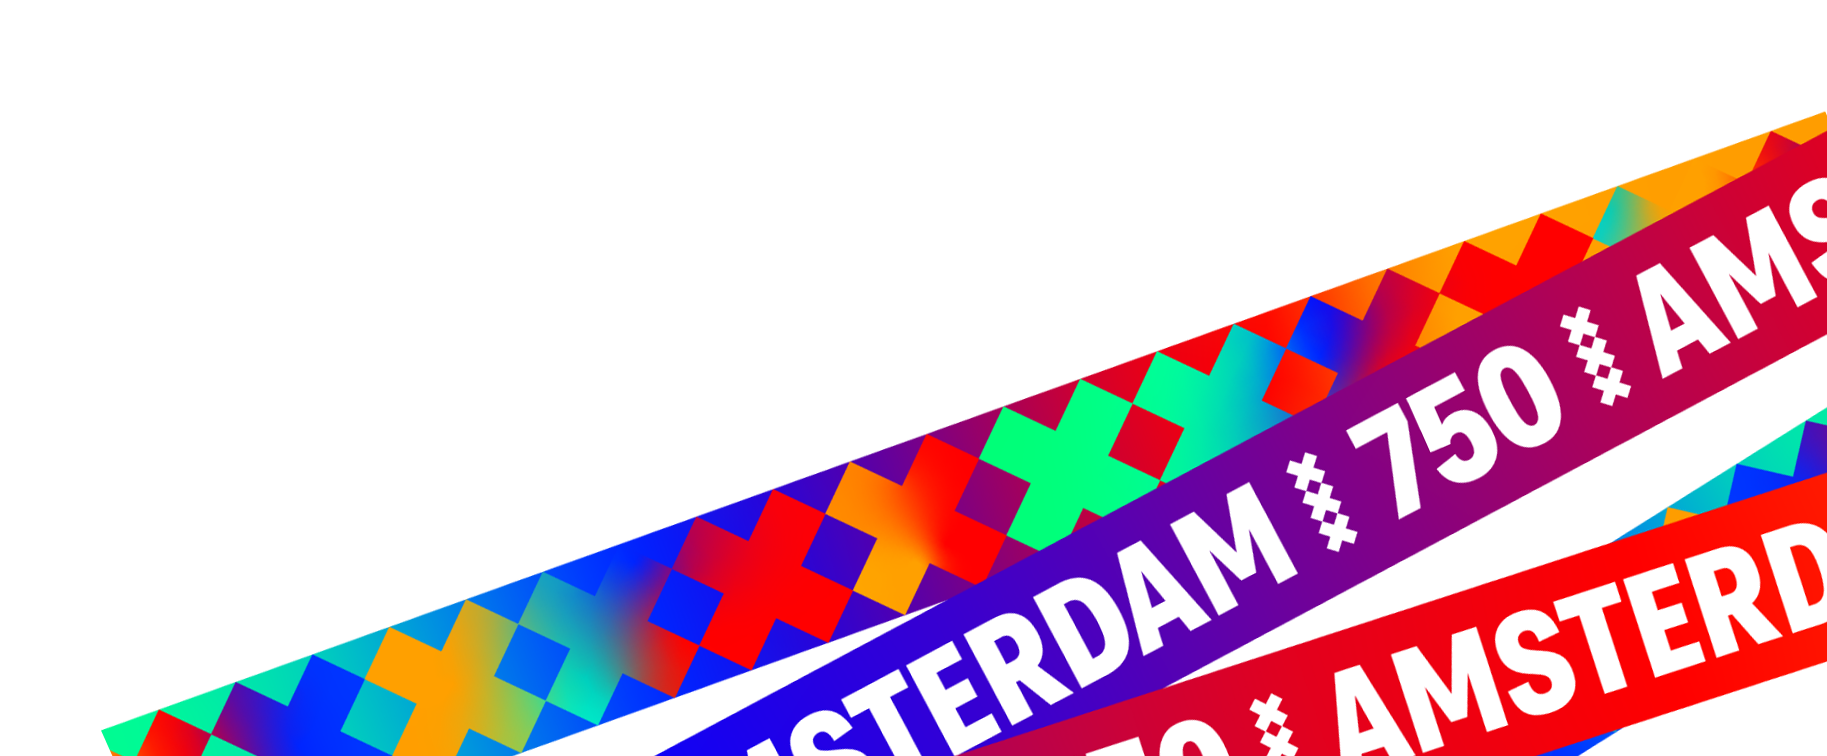 banners-onder2